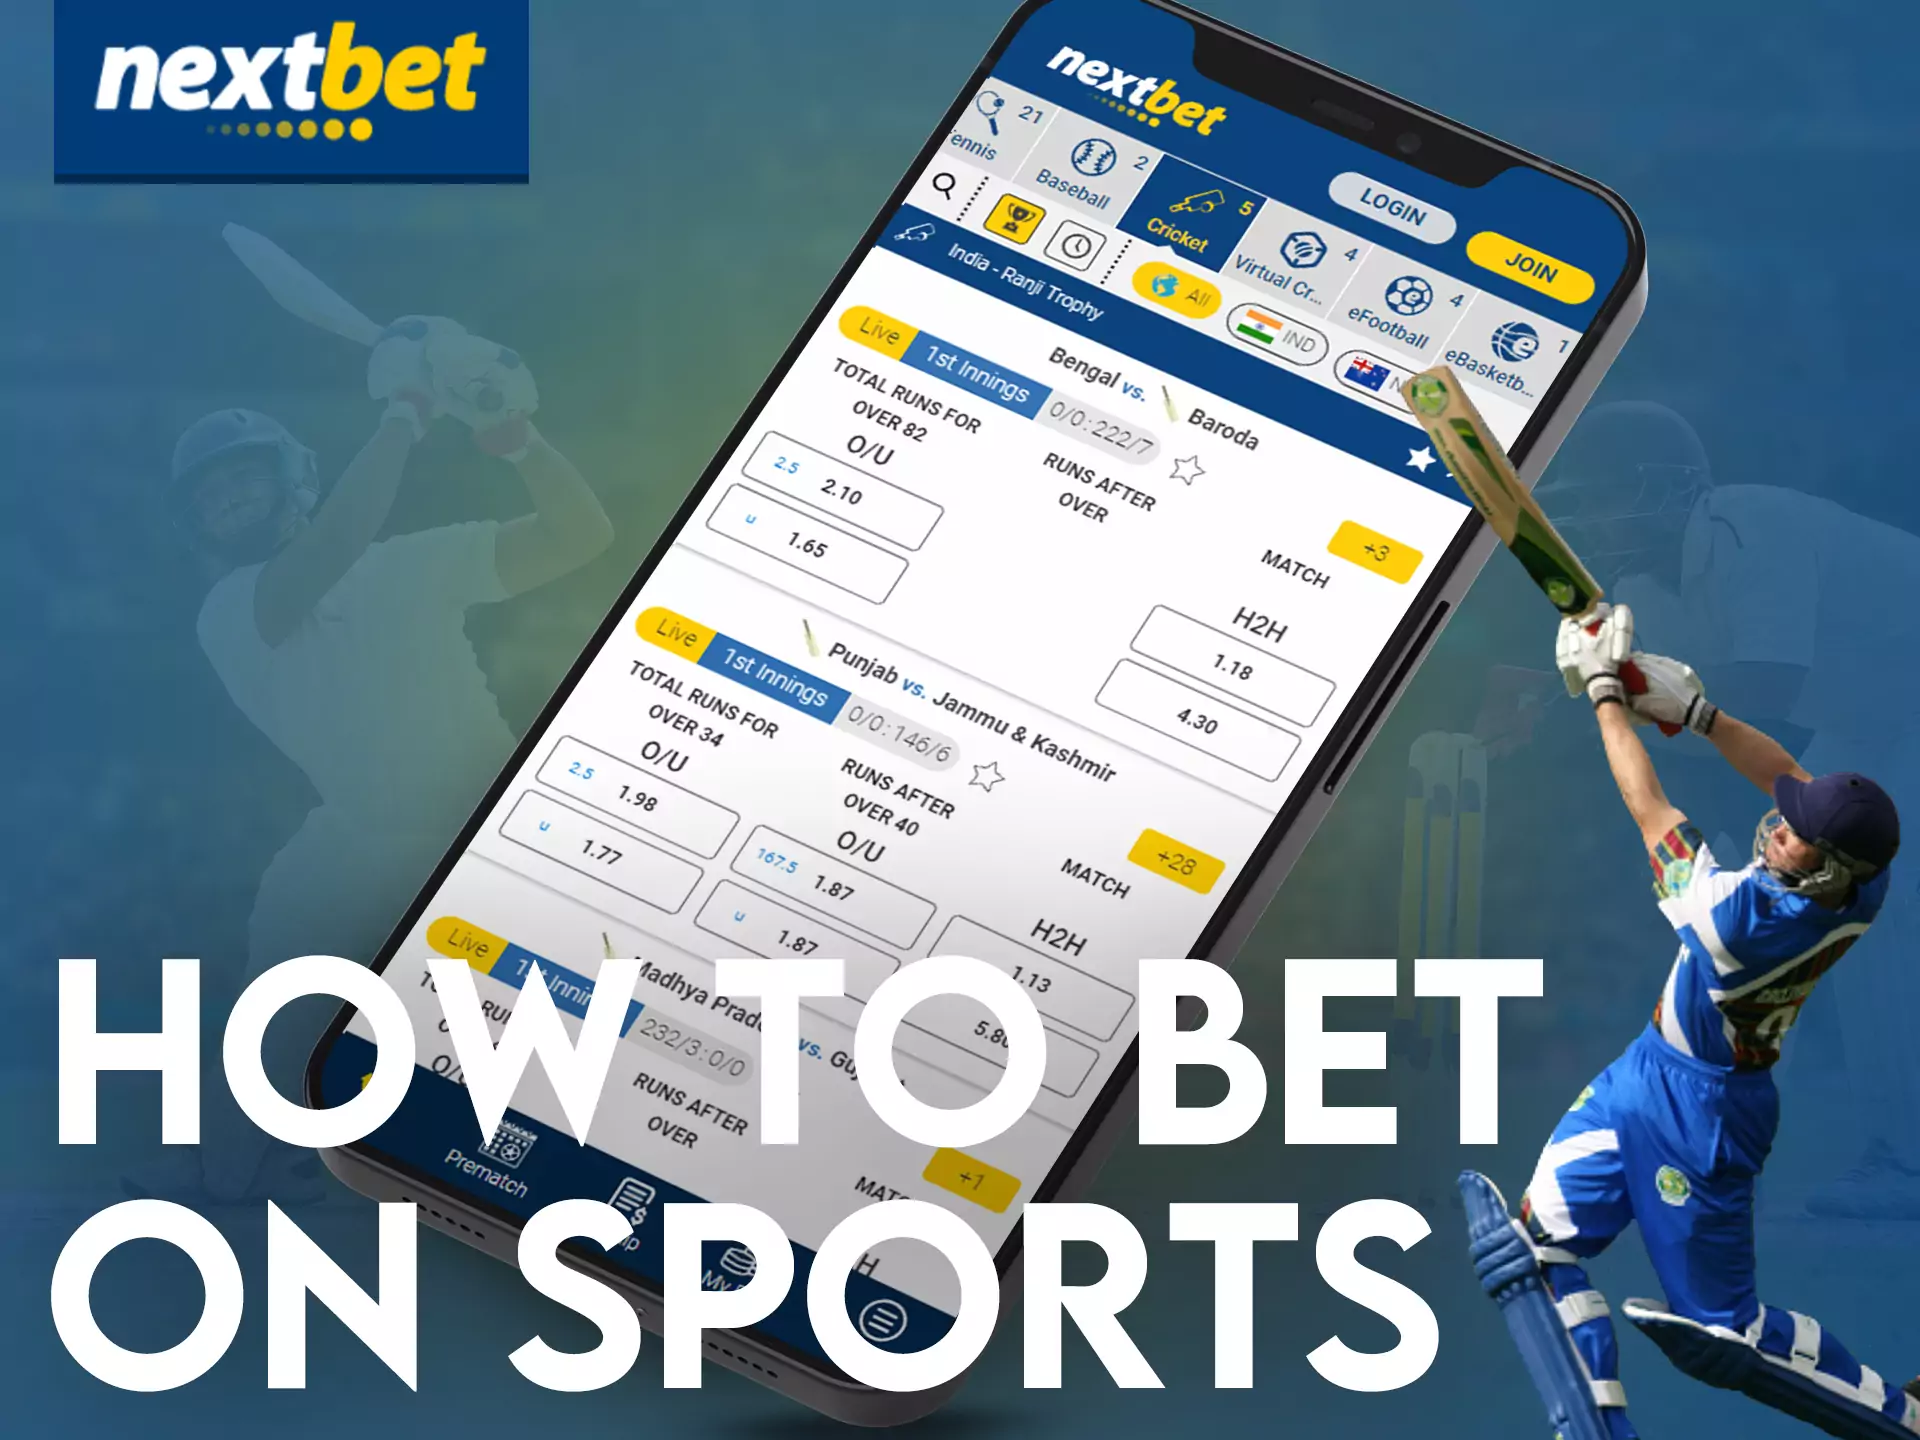 With this instruction, learn how to bet on sports in the Nextbet app.